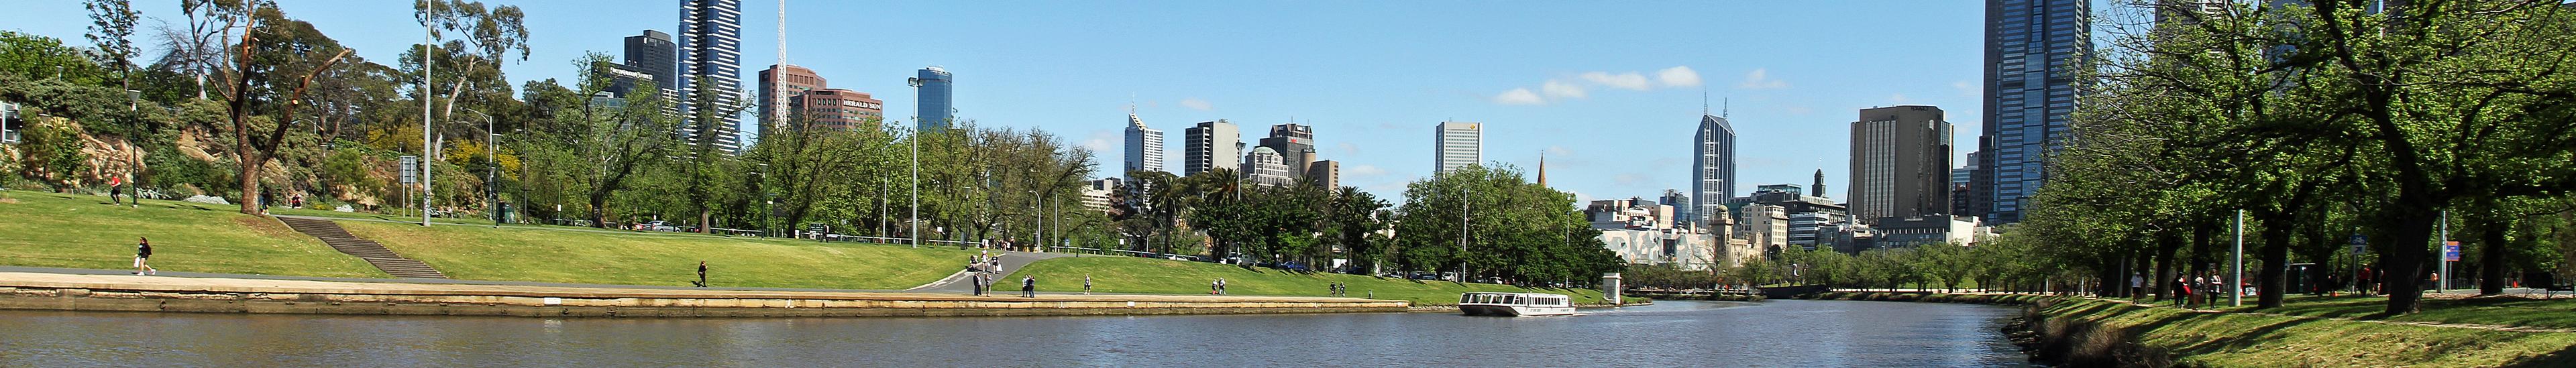 Banner image for South Yarra on GigsGuide